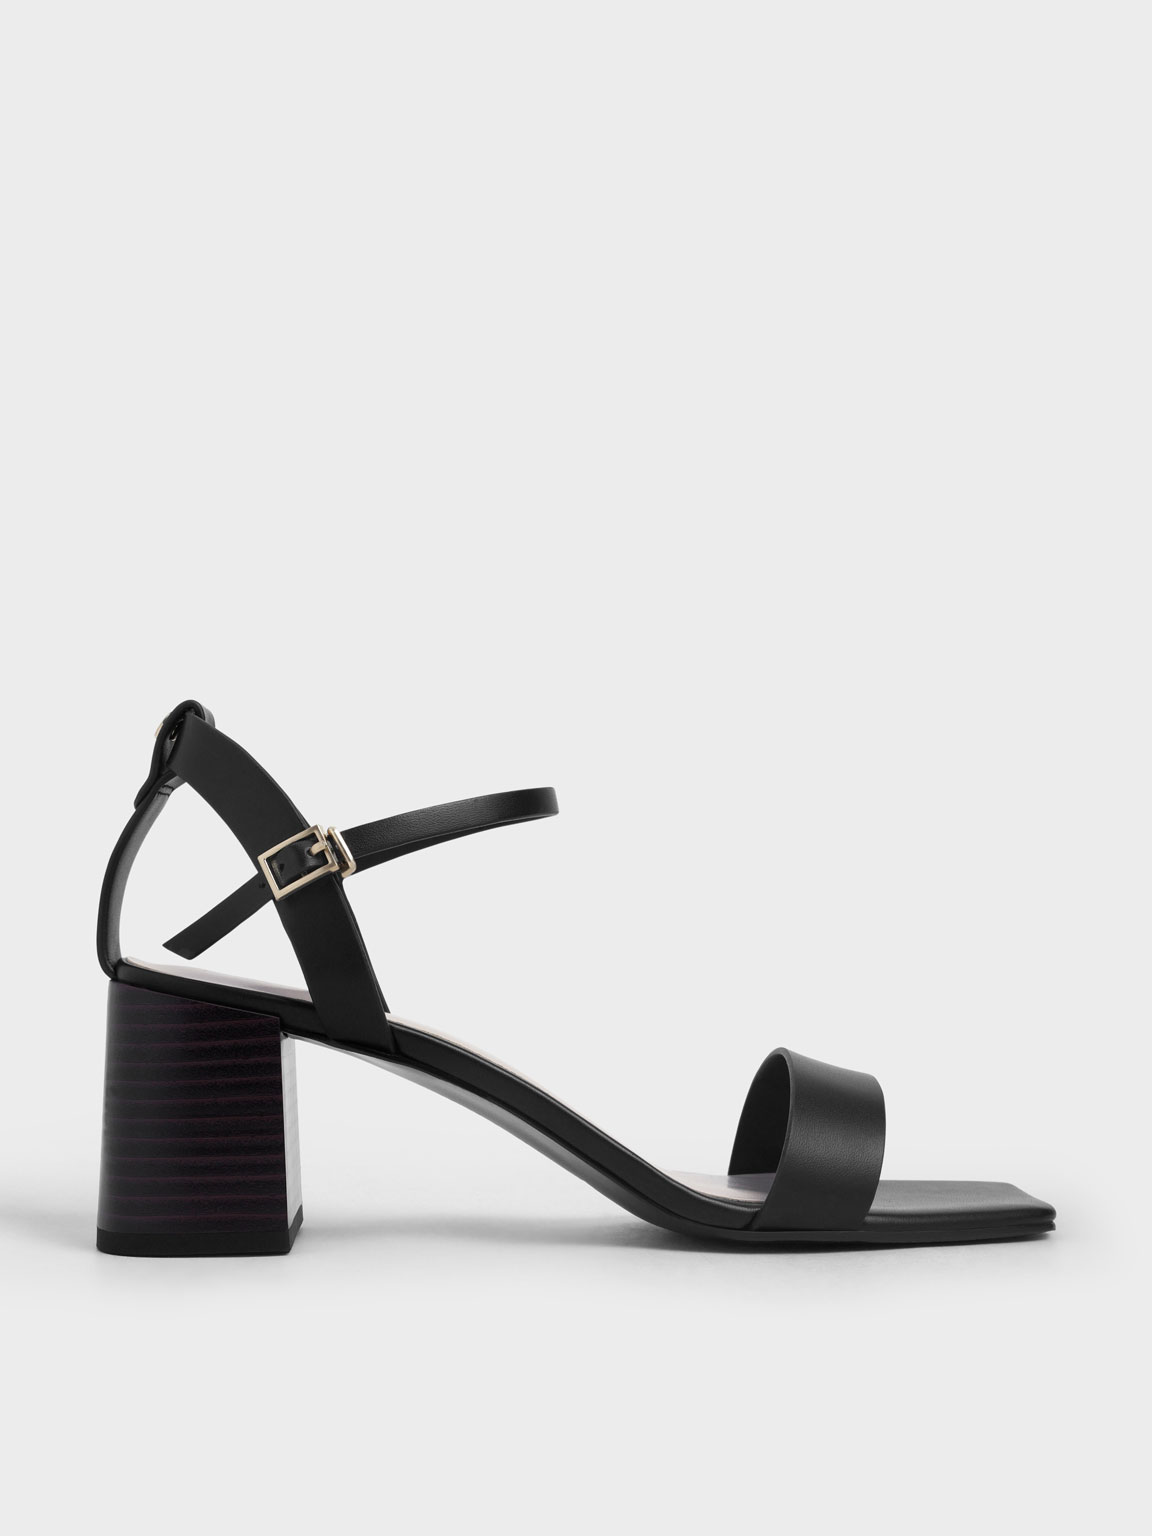 Black Ankle Strap Stacked Heel Sandals - CHARLES & KEITH US